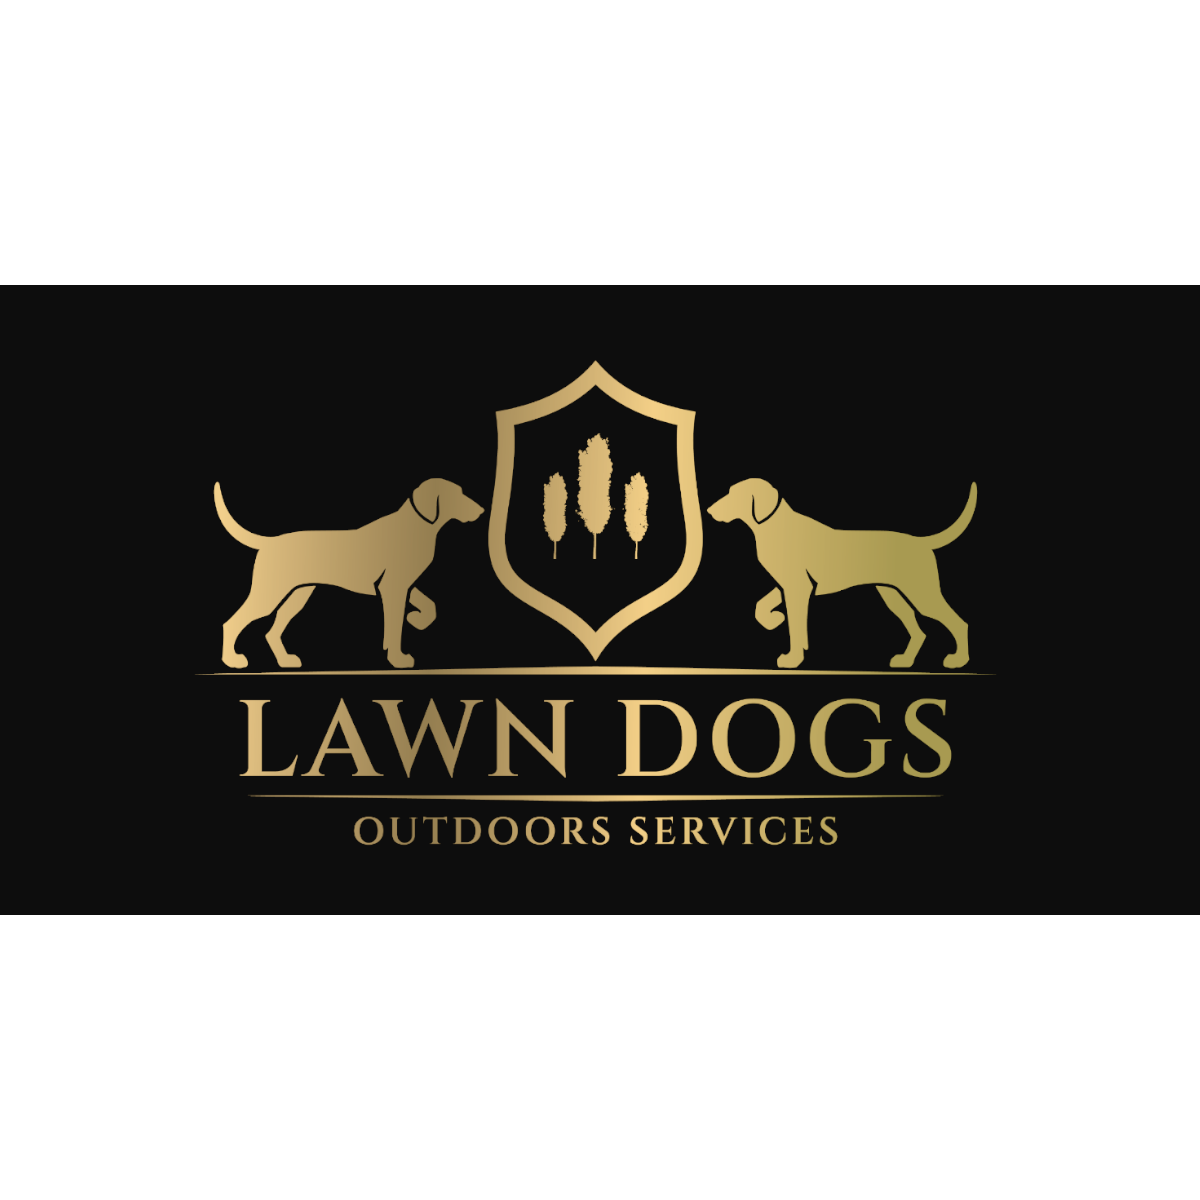 Lawn Dogs Outdoors Services